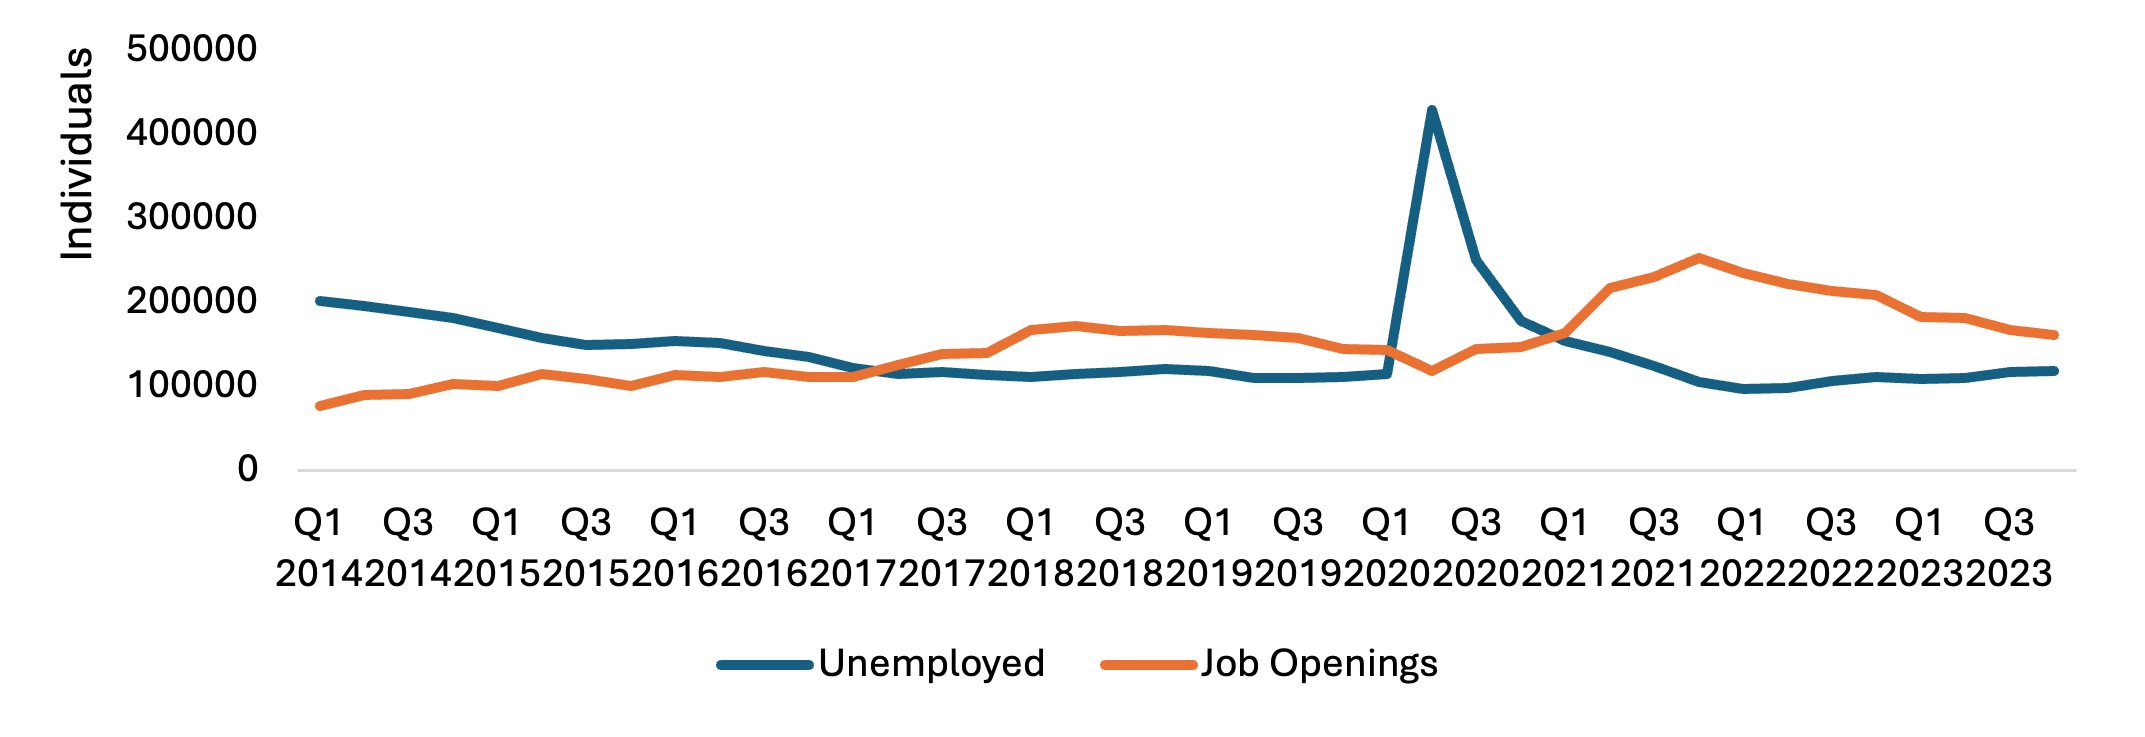 Figure 6: Number of Job Openings and Unemployed Individuals, January 2014 to September 2023